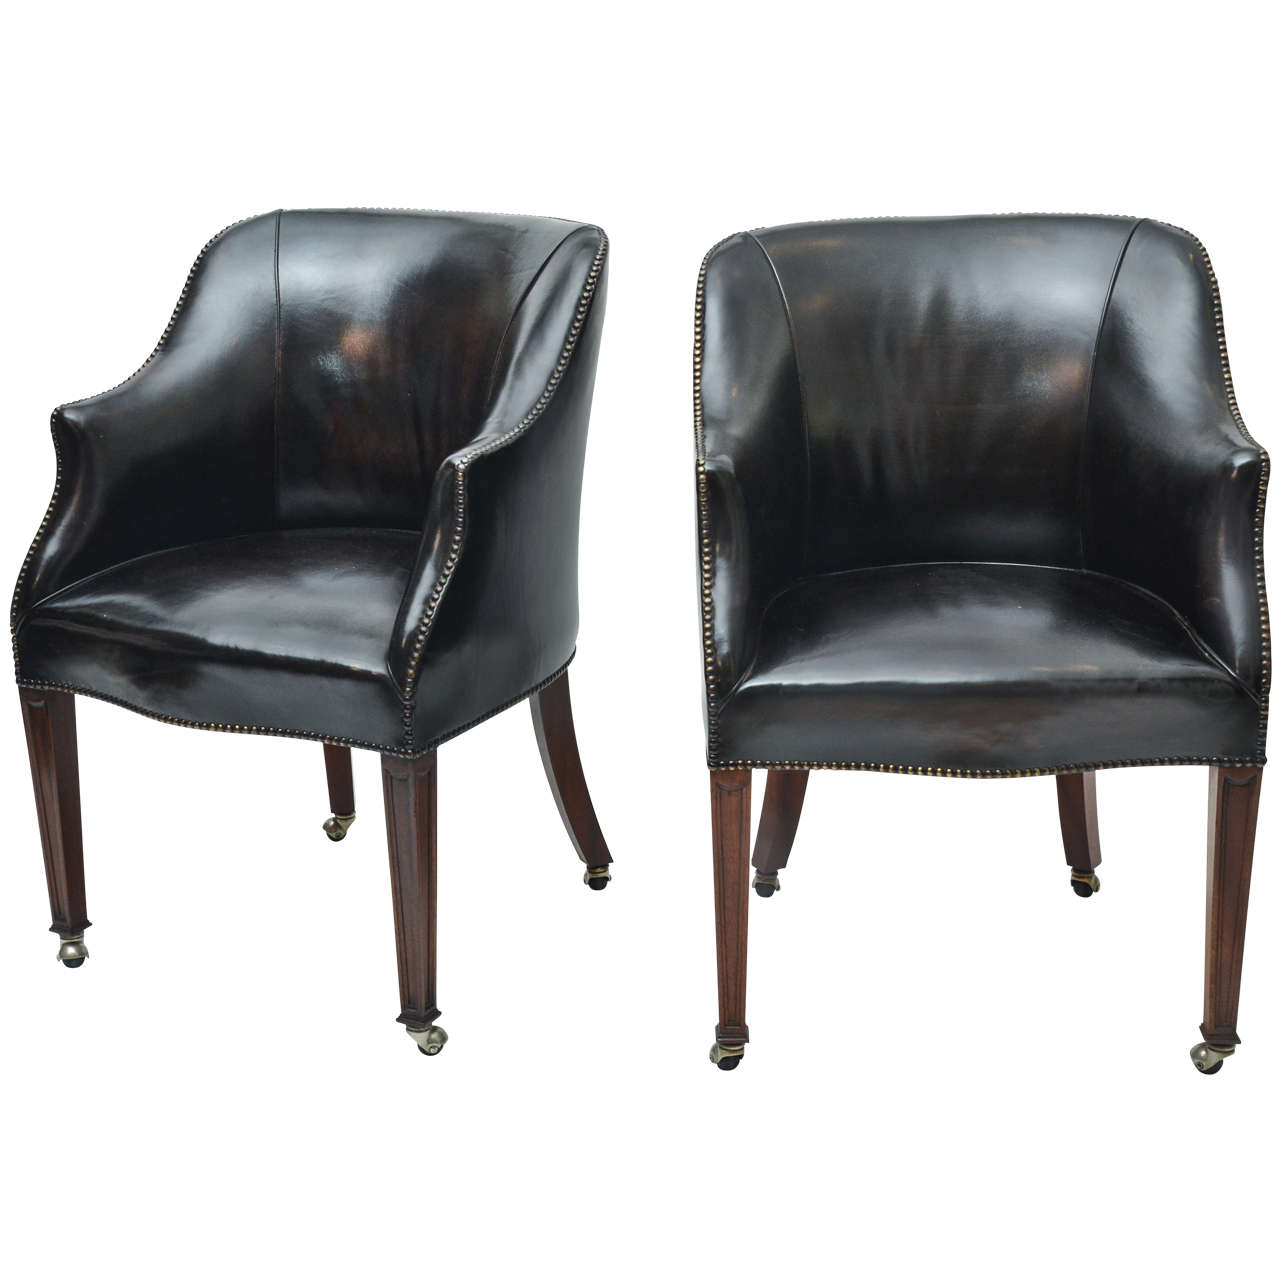 Pair of 1940s Leather Upholstered Armchairs from London's Carlton Club For Sale